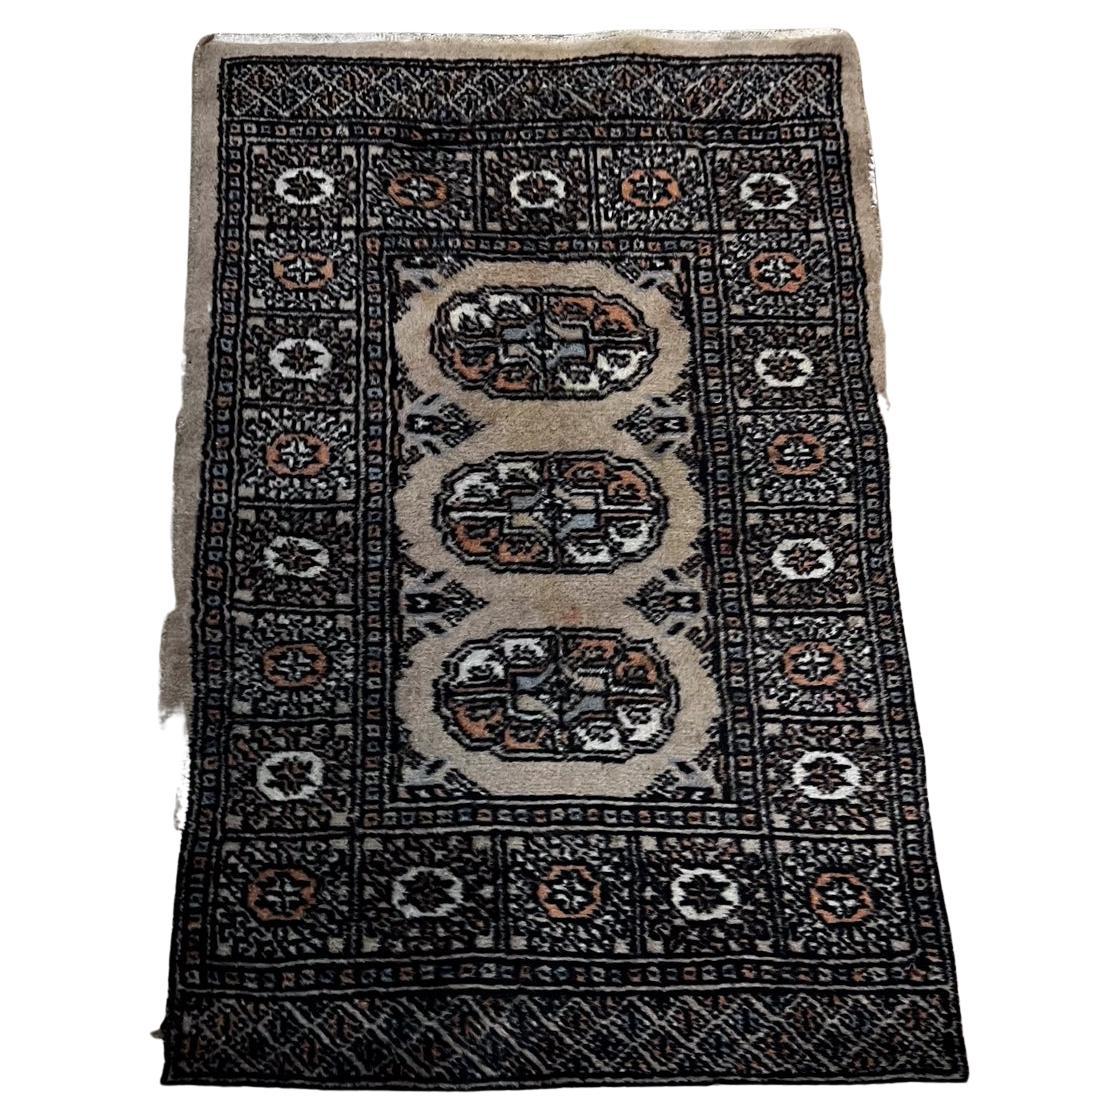 Traditional Small Rug Middle Eastern wall art Tapestry
Handmade Persian prayer Rug
21.25 x 34.75 h
Preowned original vintage condition.
See images please.